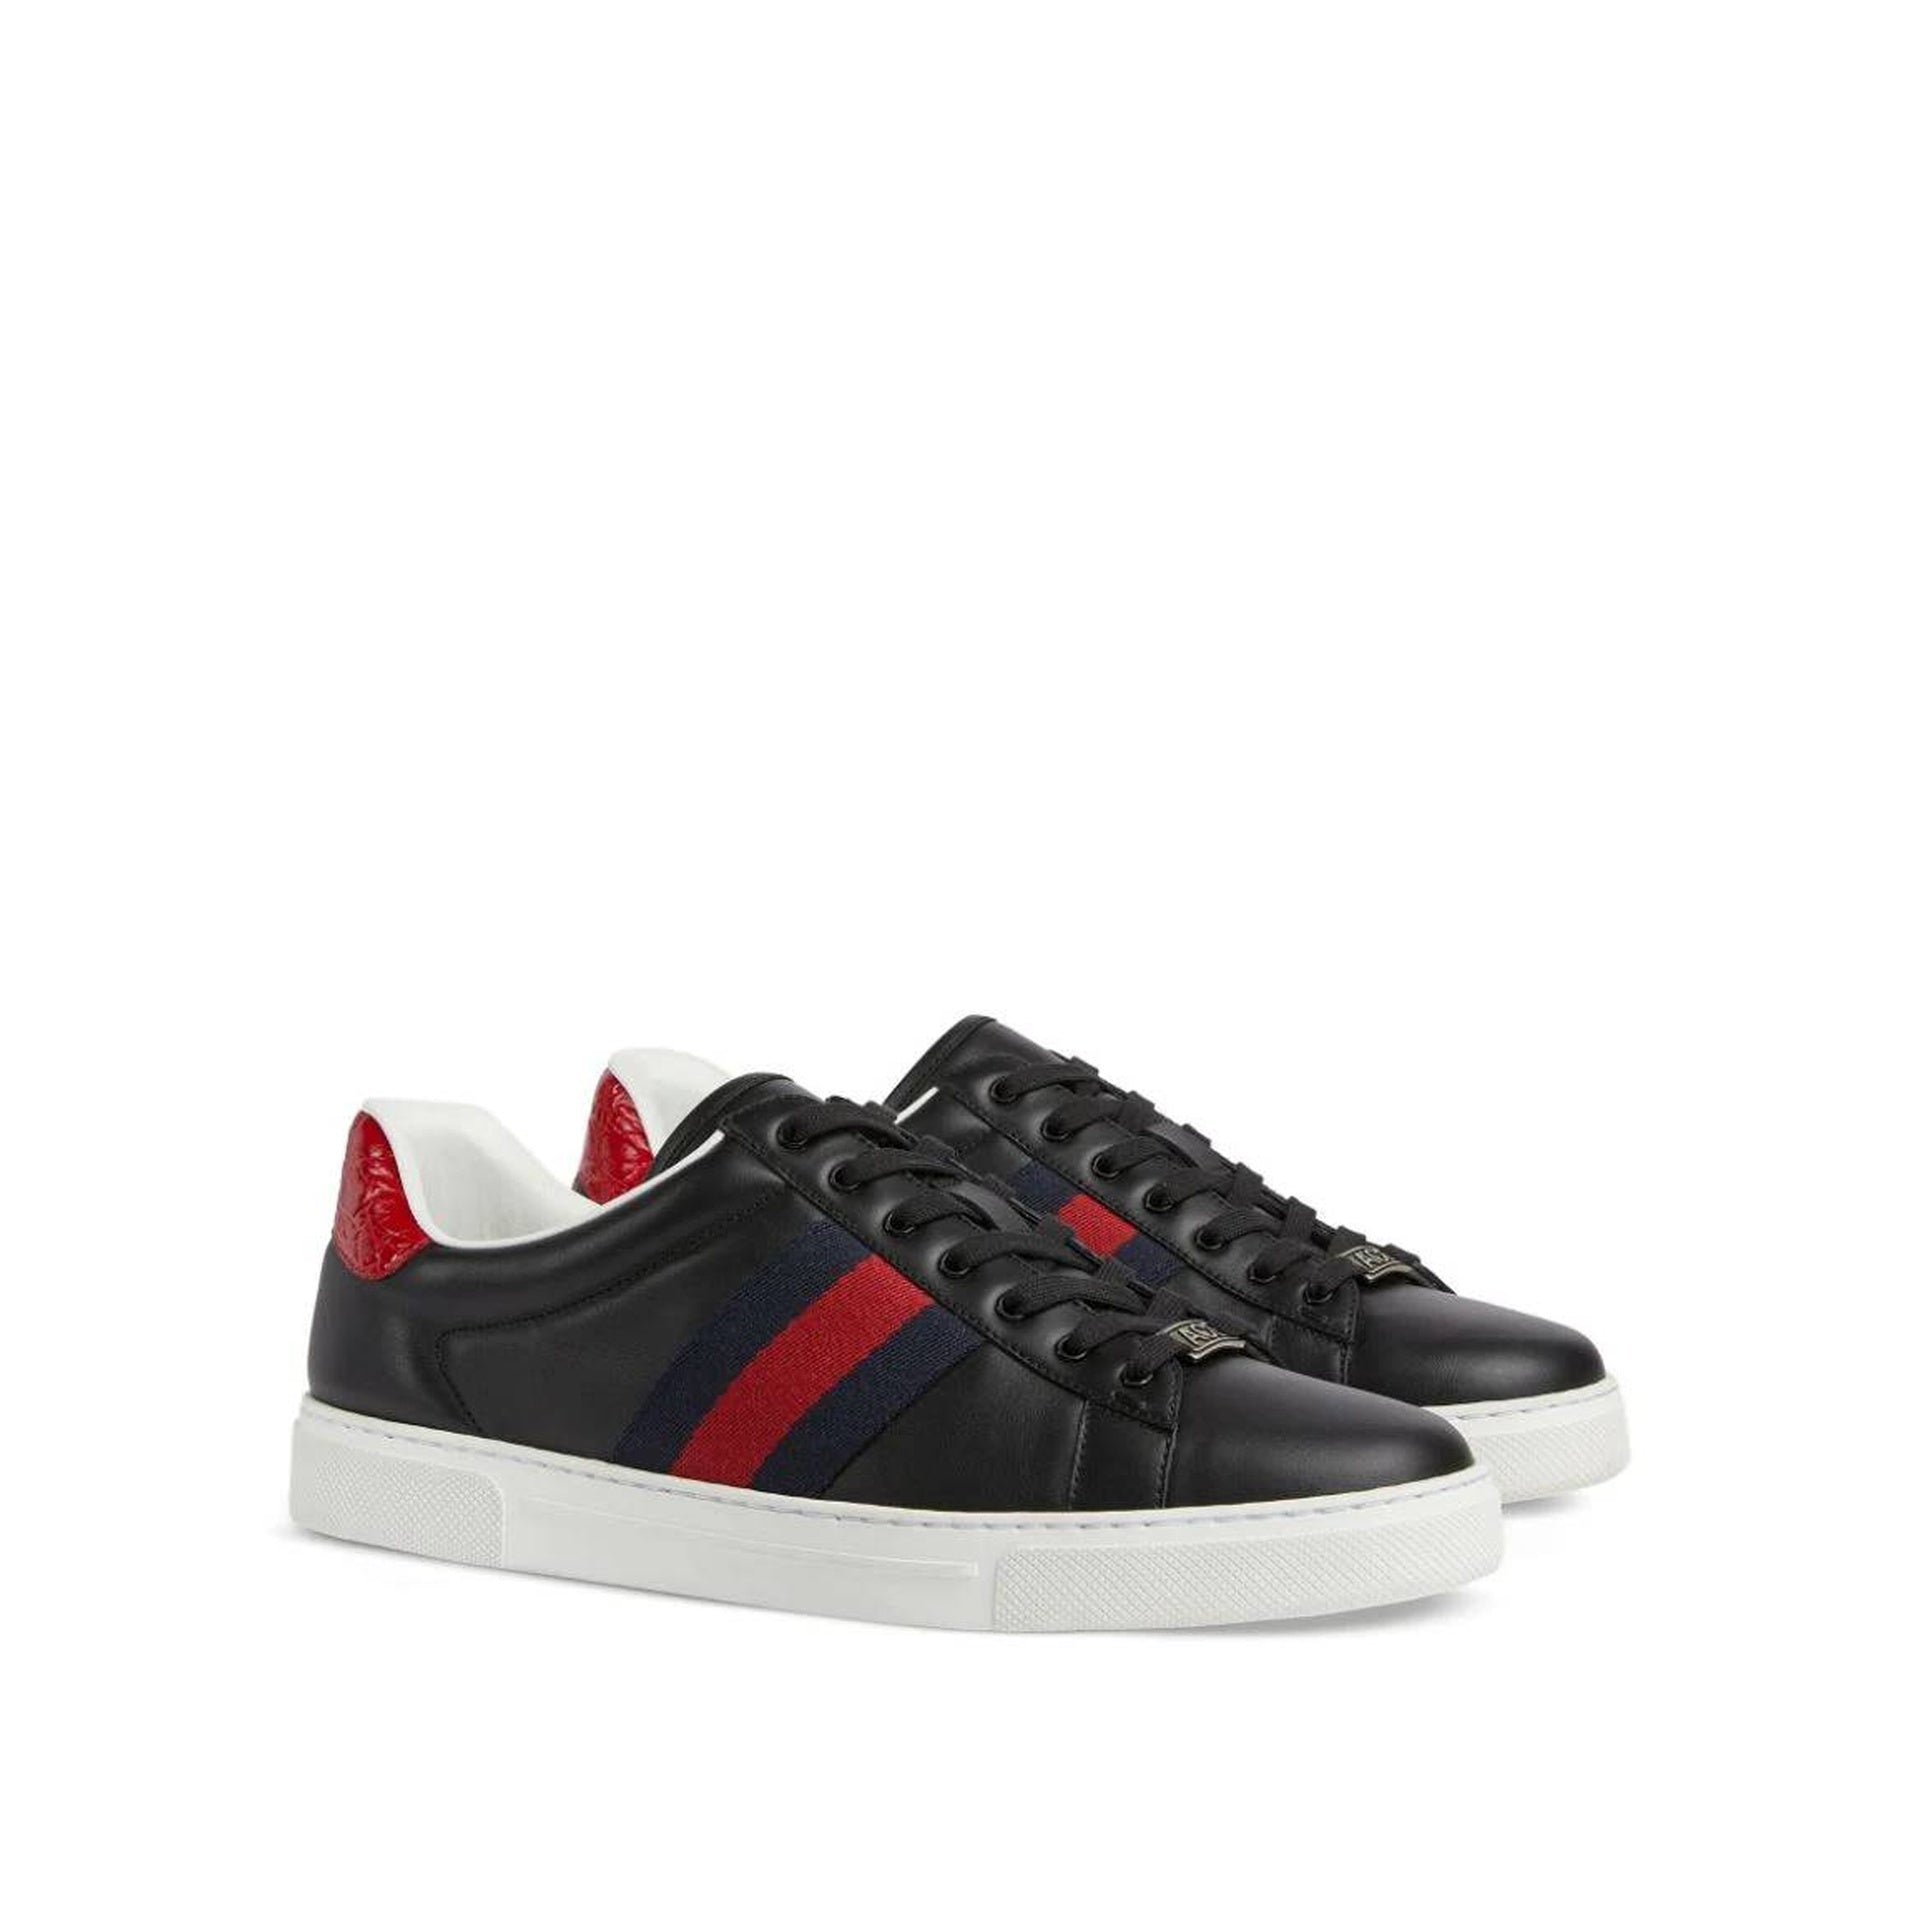 GUCCI_Gucci_Ace_Leather_Sneakers_757892_AACAG_1096_Black_2.jpg